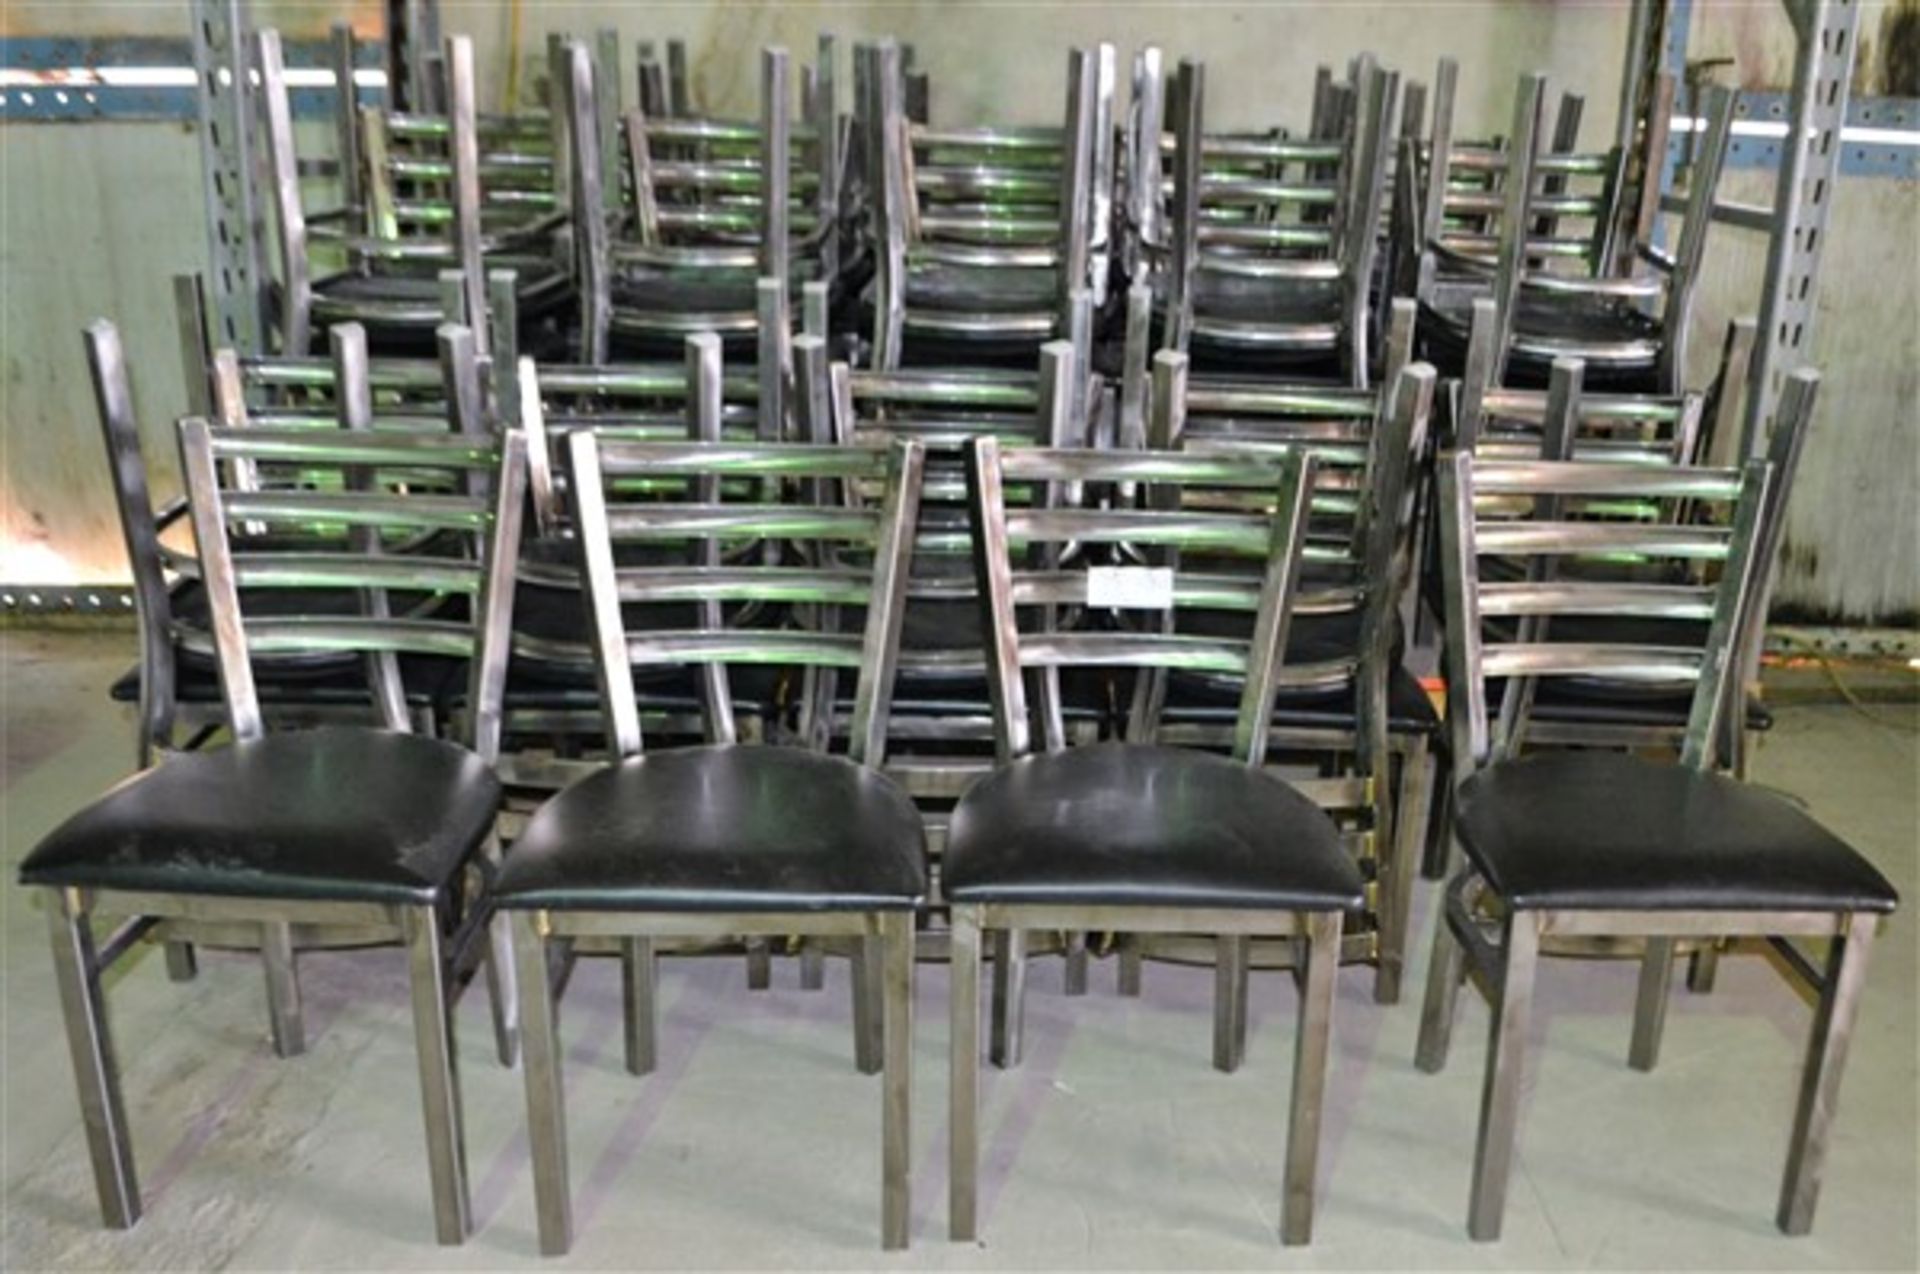 34 Chairs